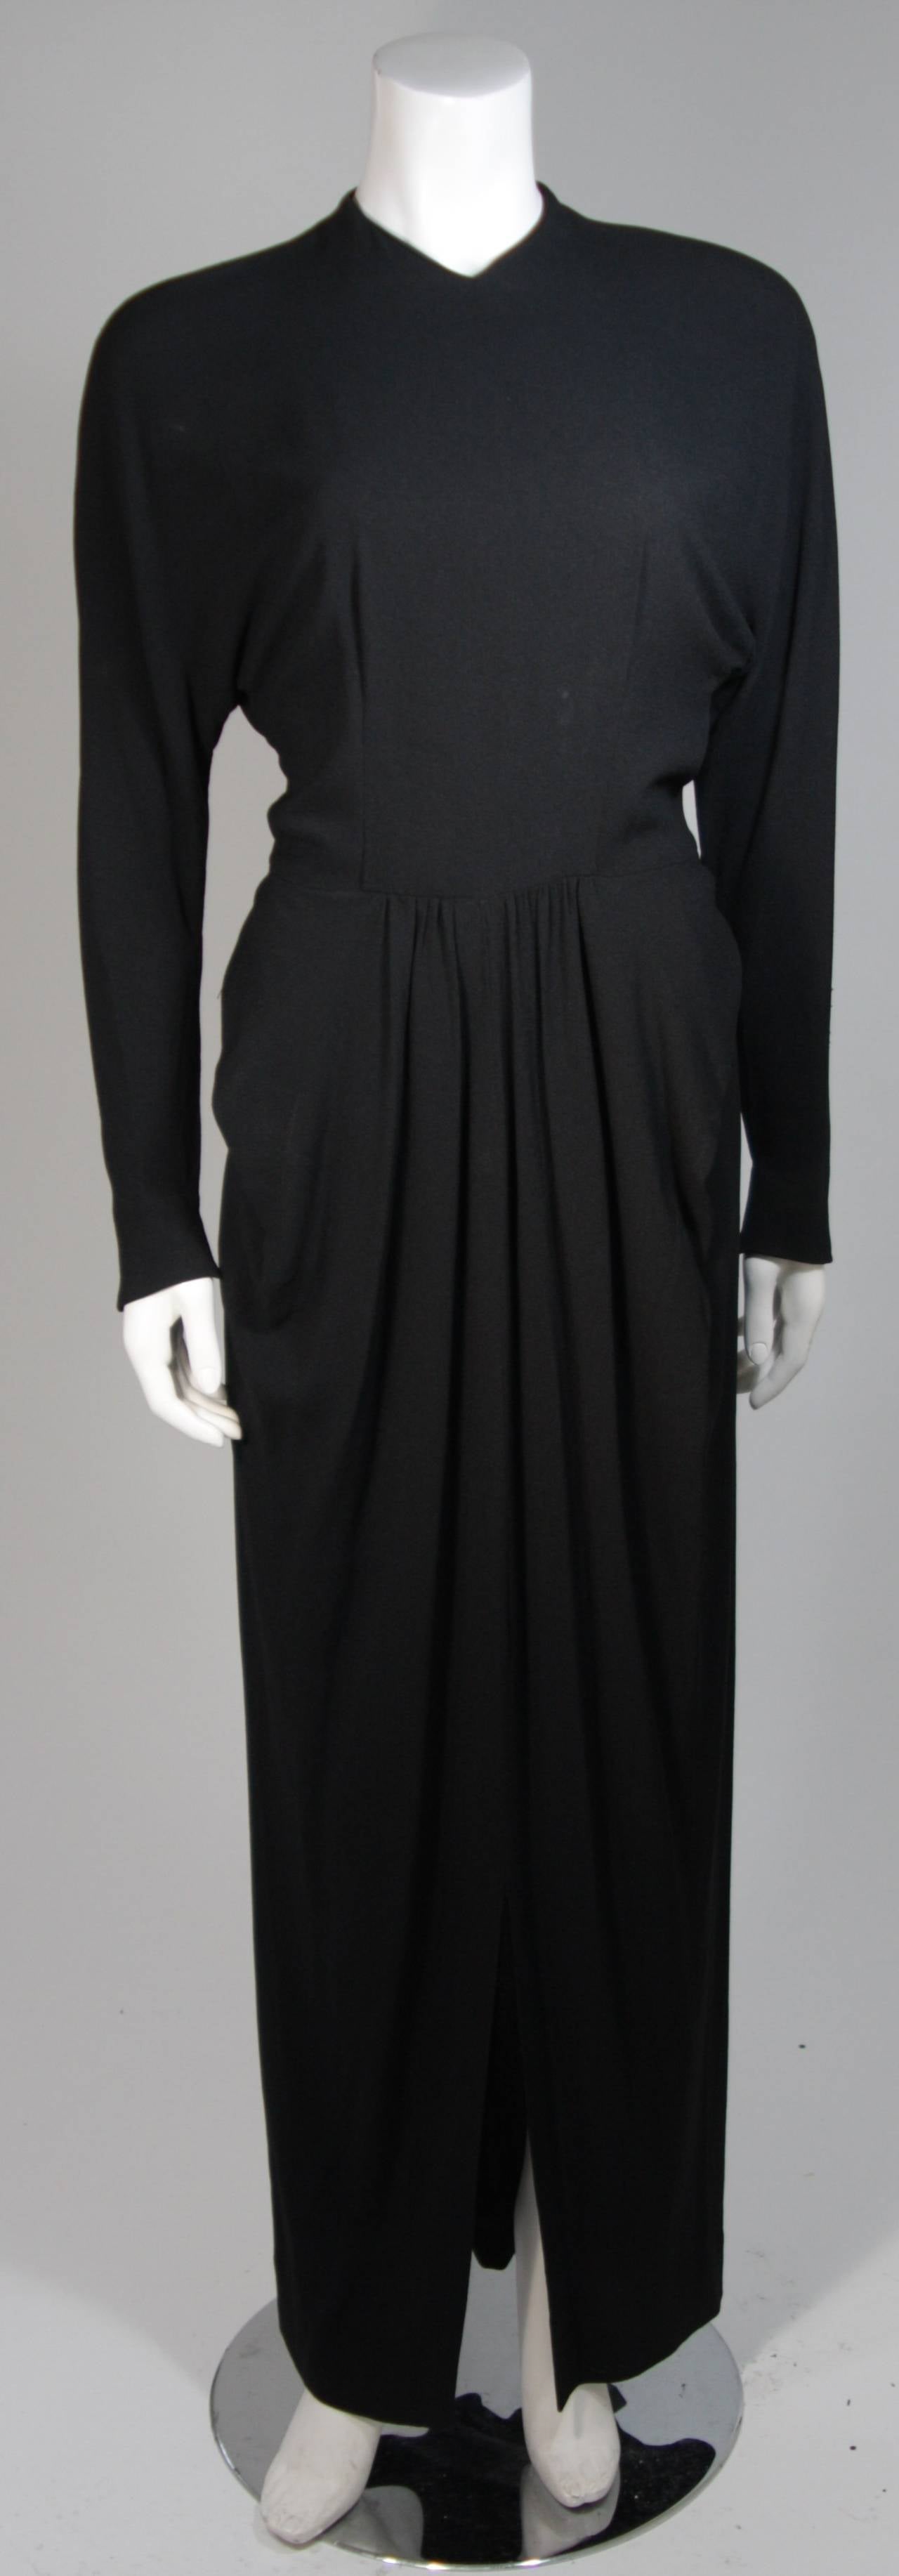 This Ceil Chapman gown is composed of a black silk crepe. The dress features center front draping at the waist and draped bat-wing style sleeves. There are center back buttons and a slight keyhole opening. In excellent vintage condition. Beautiful